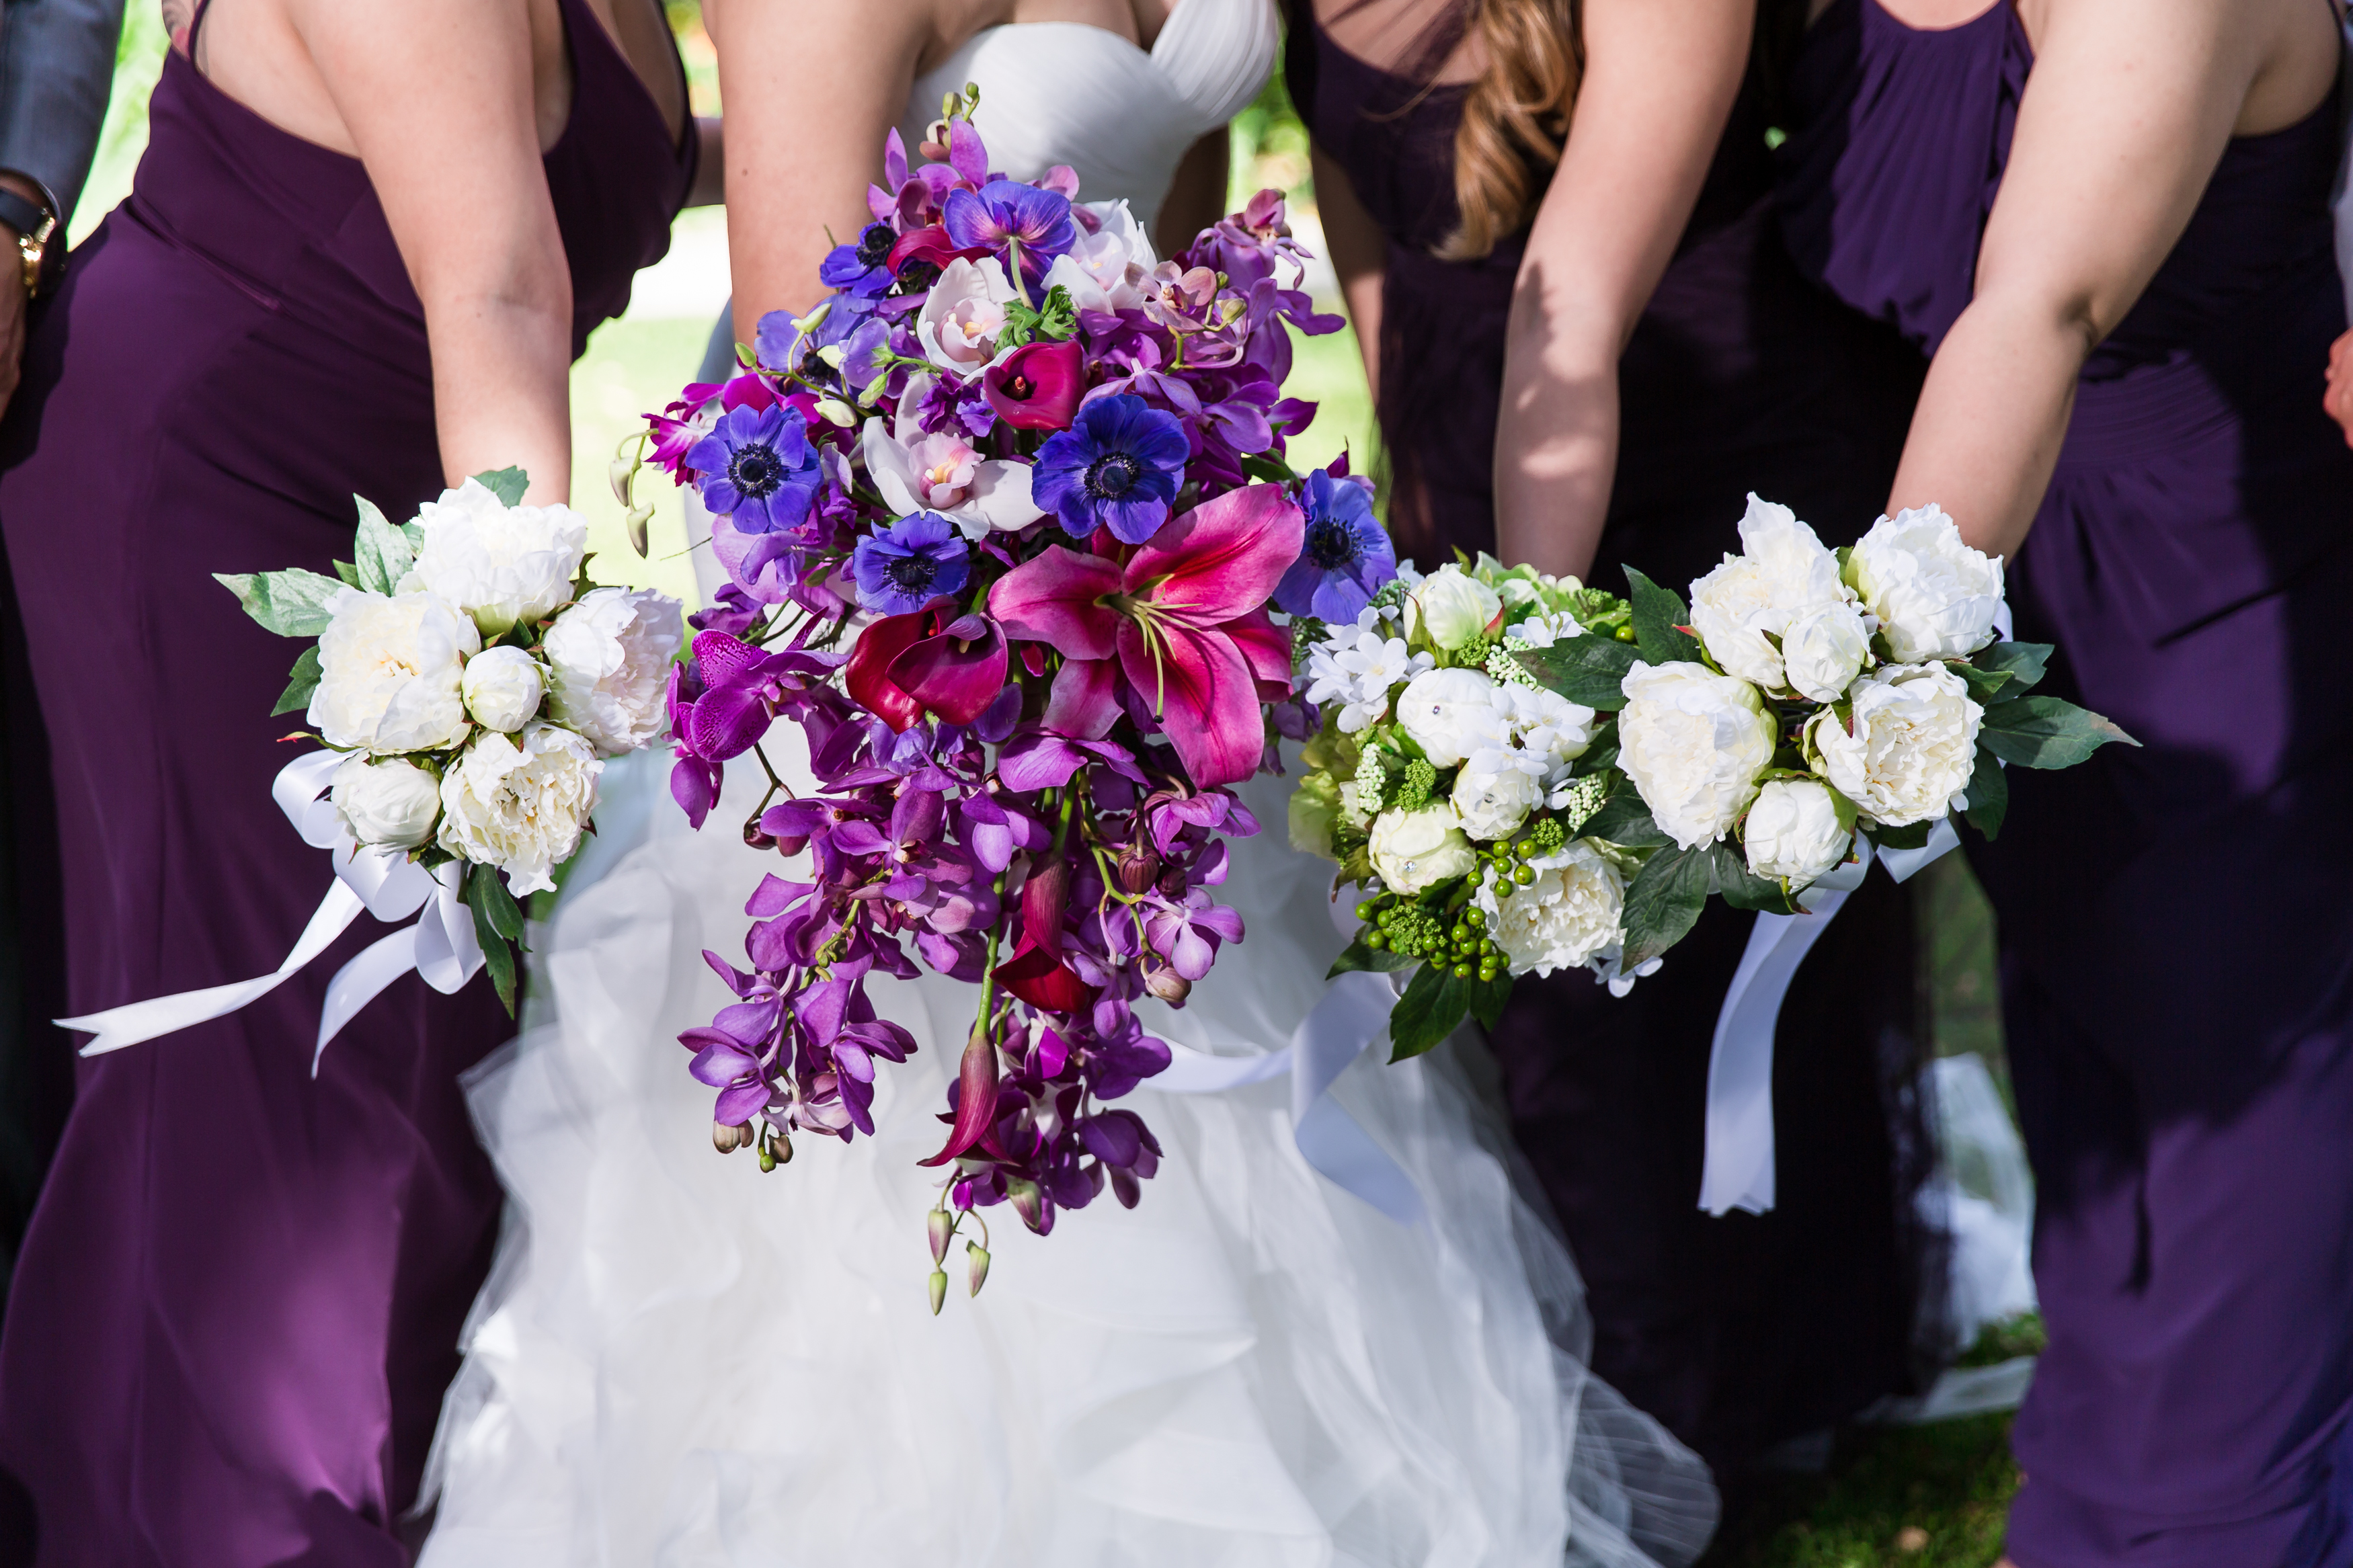 Bride and bridesmaids holding out purple wedding bouquets